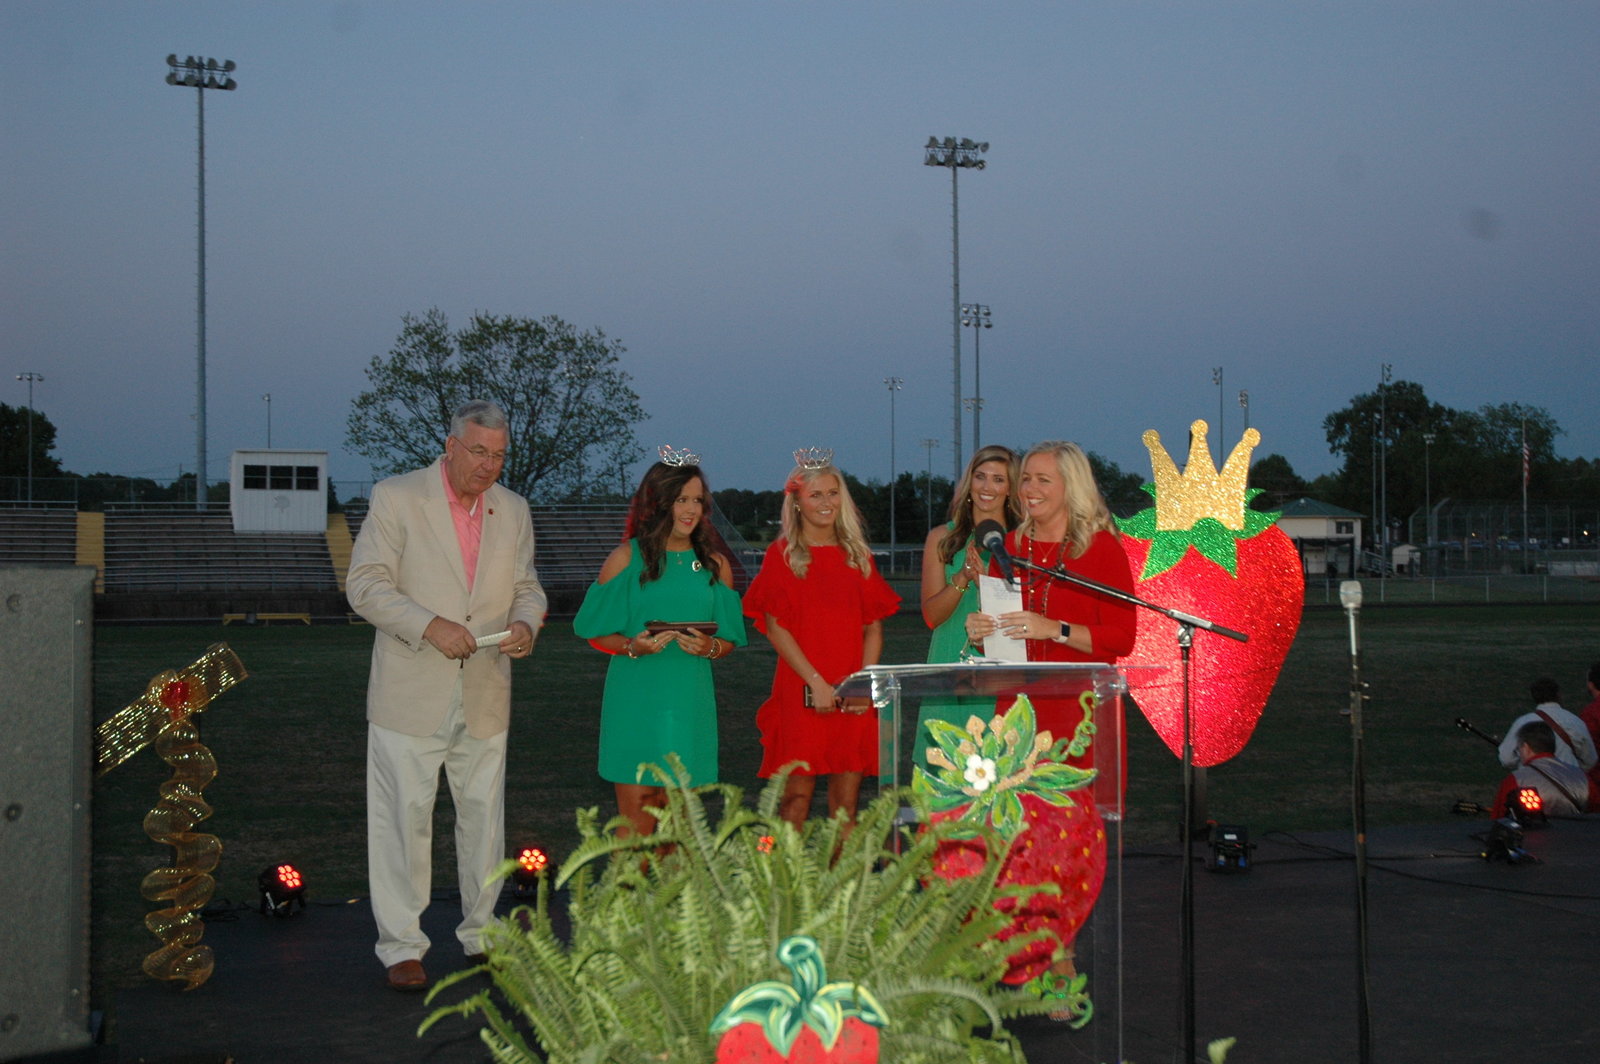 West Tennessee Strawberry Festival - Opening Ceremonies - 30